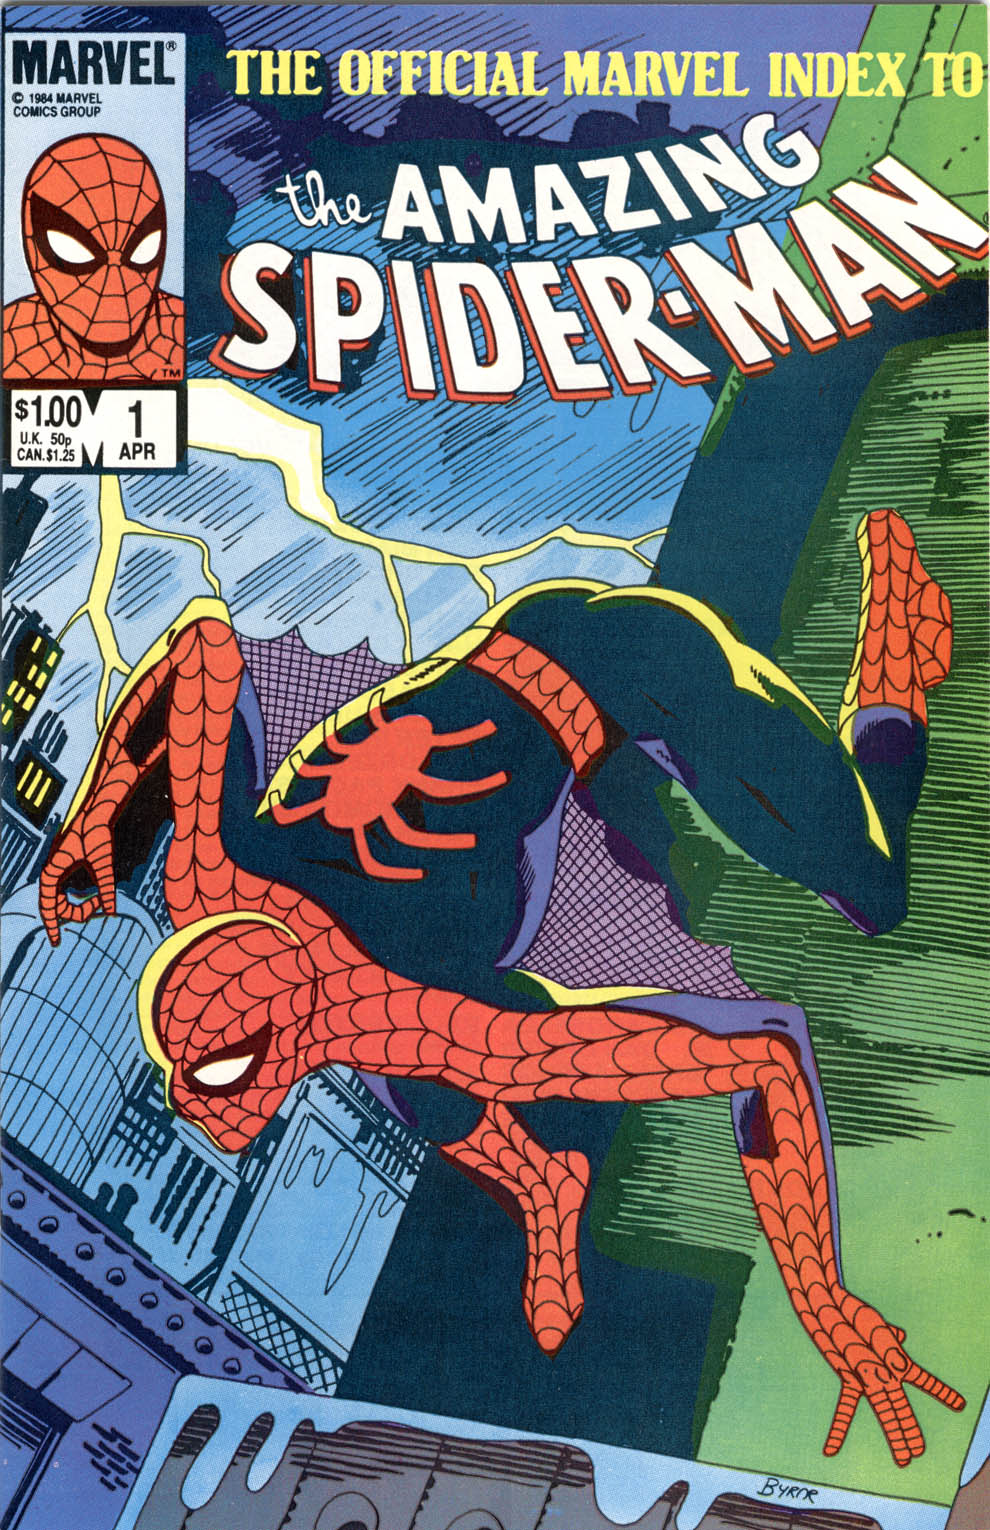 Read online The Official Marvel Index to The Amazing Spider-Man comic -  Issue #1 - 1